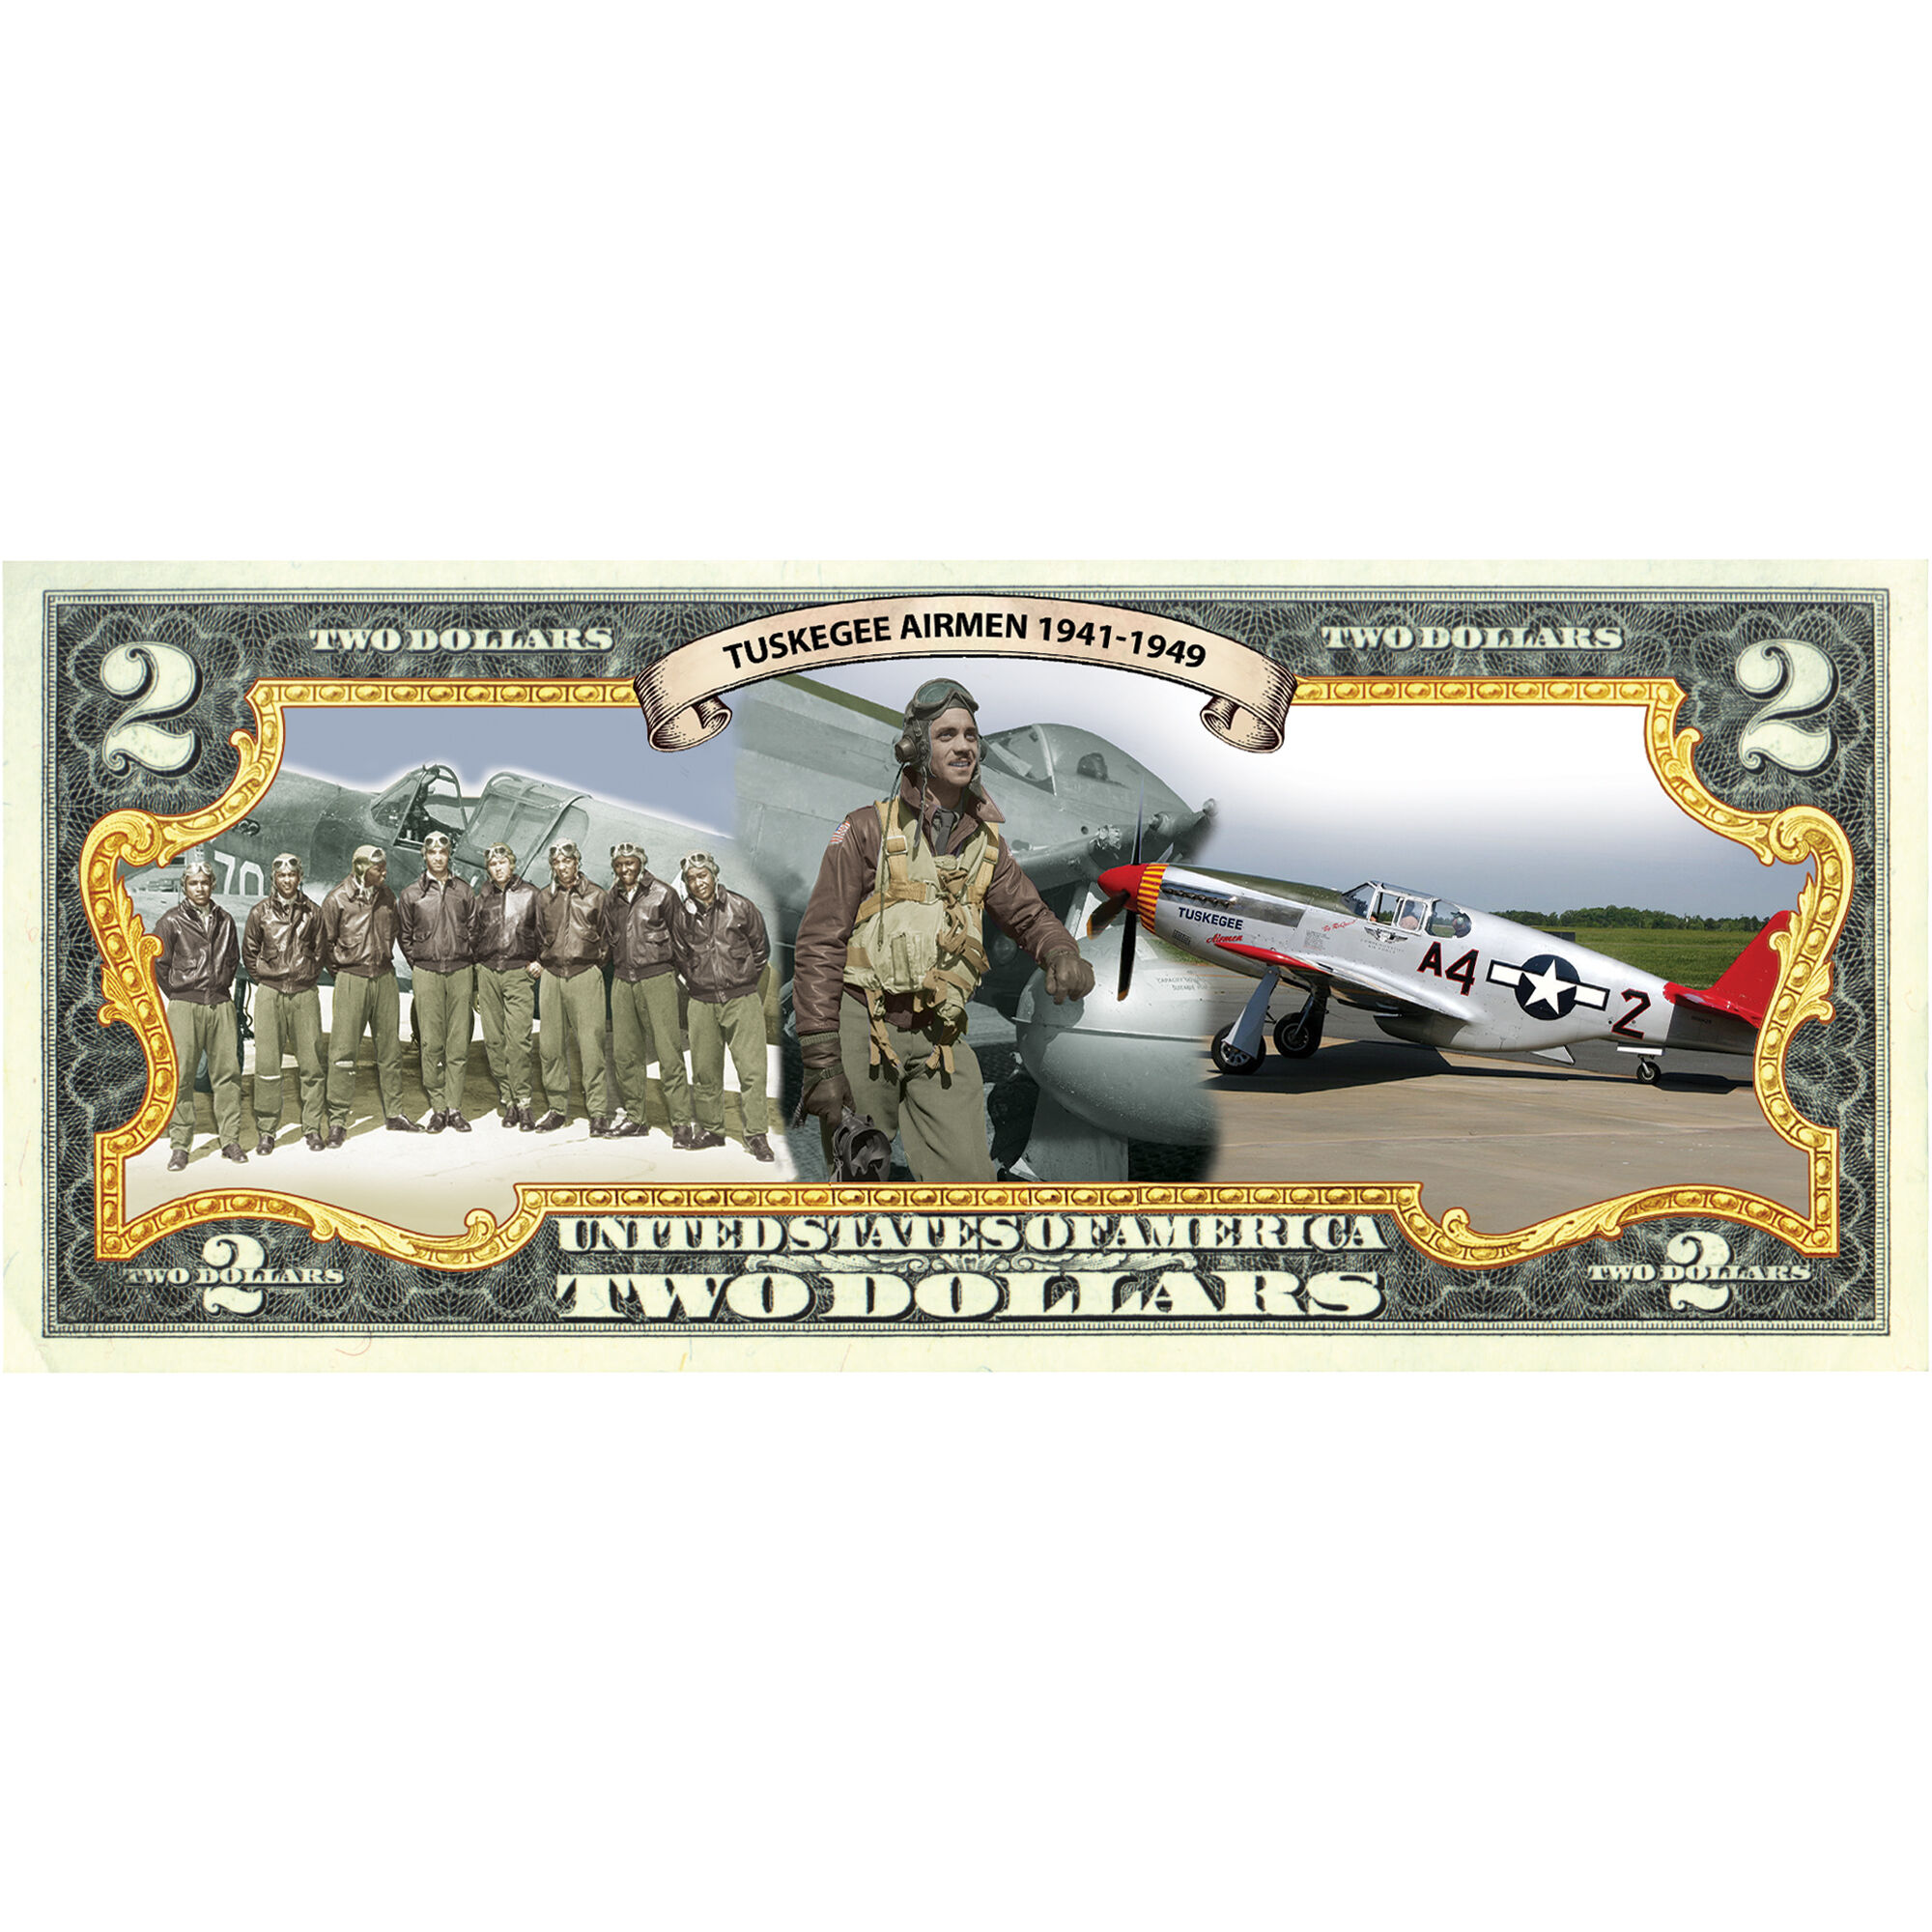 Tuskegee Airmen Coin Currency Set 10122 0010 e bill